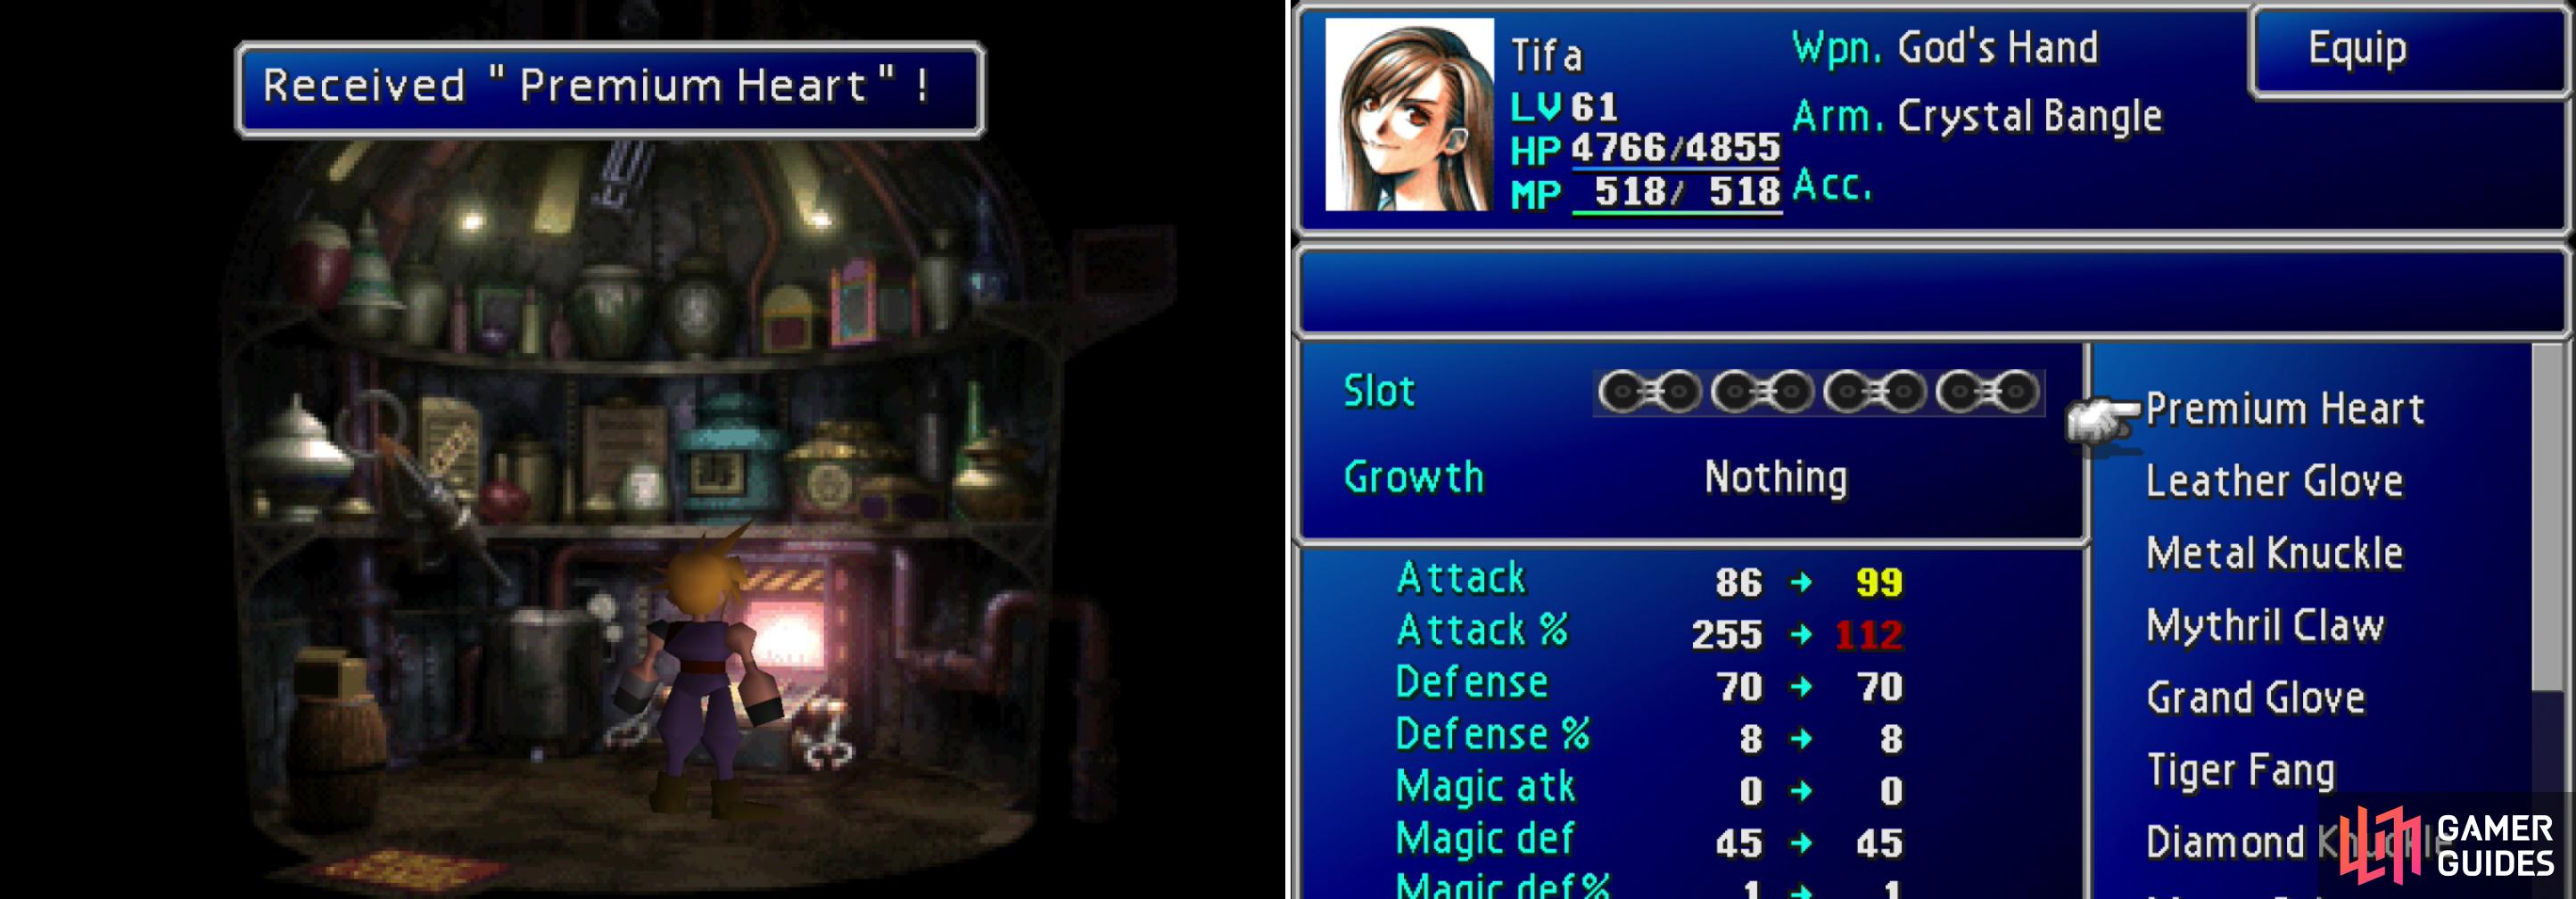 Molest the machine in the “ITEM” shop in Sector 6 to obtain Tifa’s ultimate weapon, the Premium Heart (left). Unfortunately for Tifa, the way it charges limits its usefulness compared to other ultimate weapons (right).